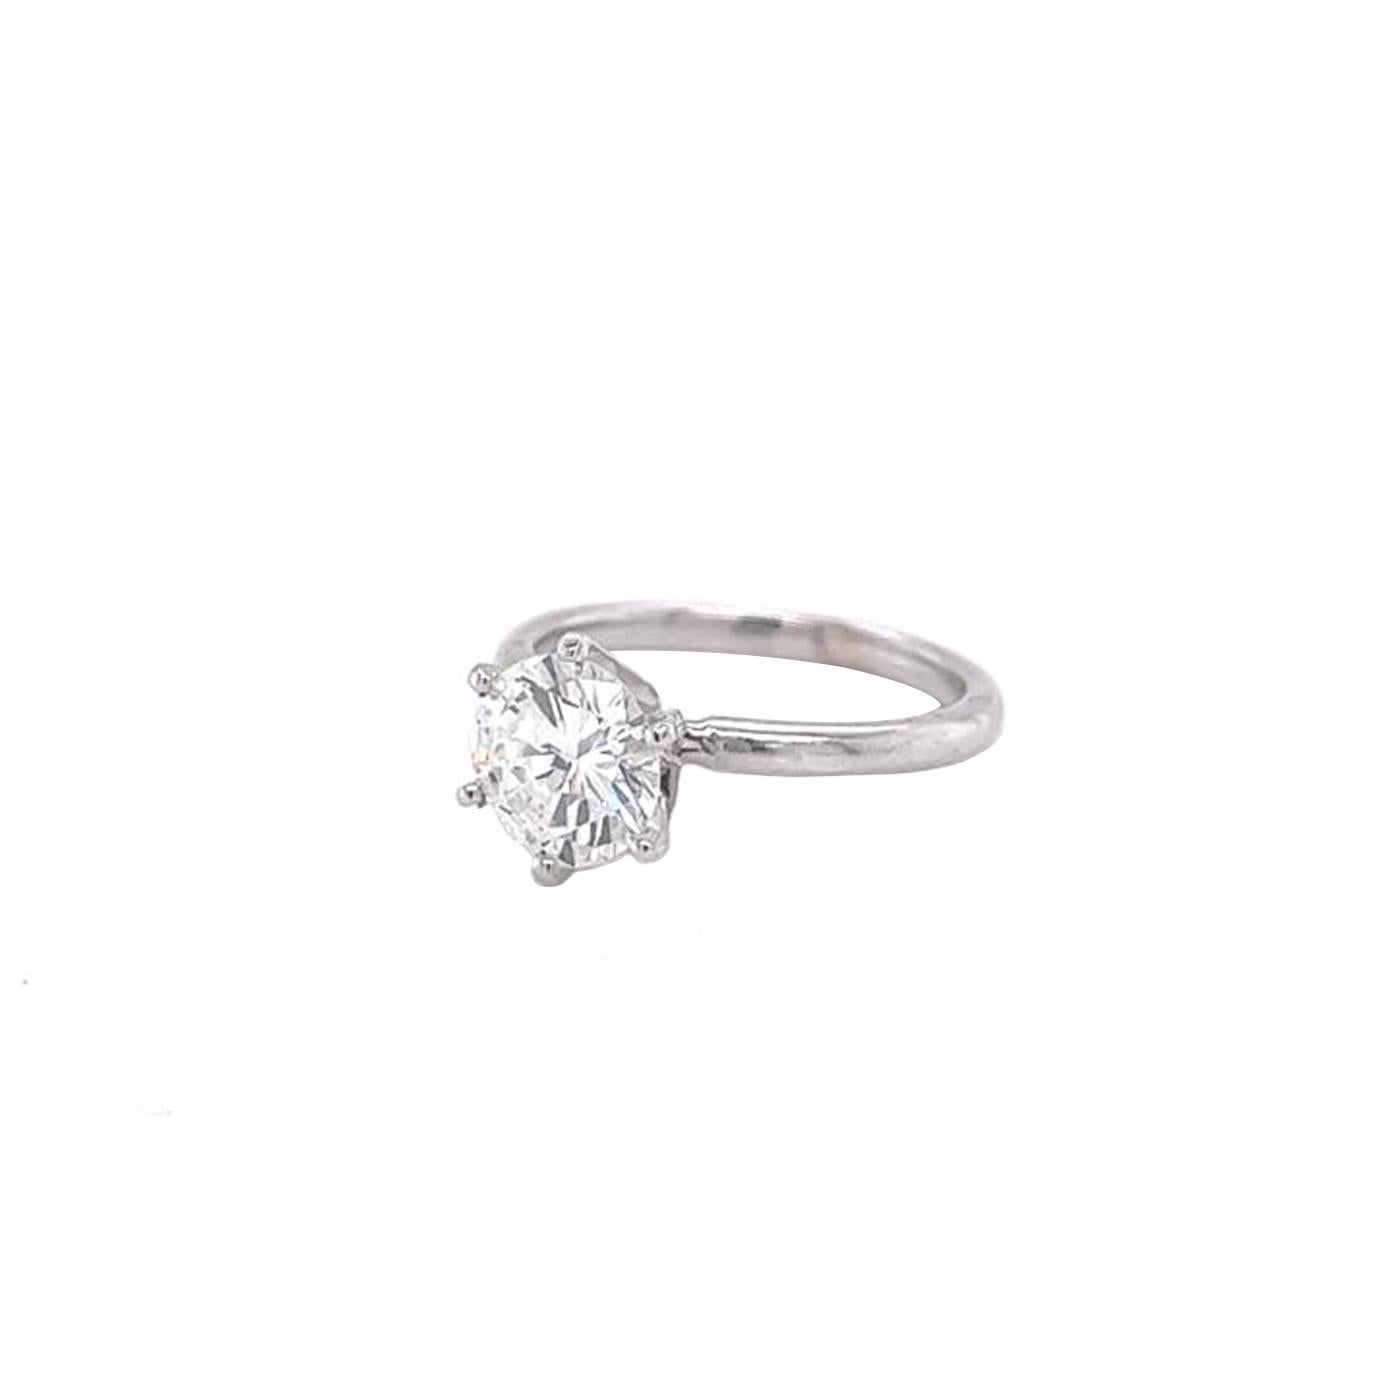 Modernist GIA Certified 1.25ct Solitaire Diamond Ring 14k Gold VS1 Clarity Natural H Color For Sale